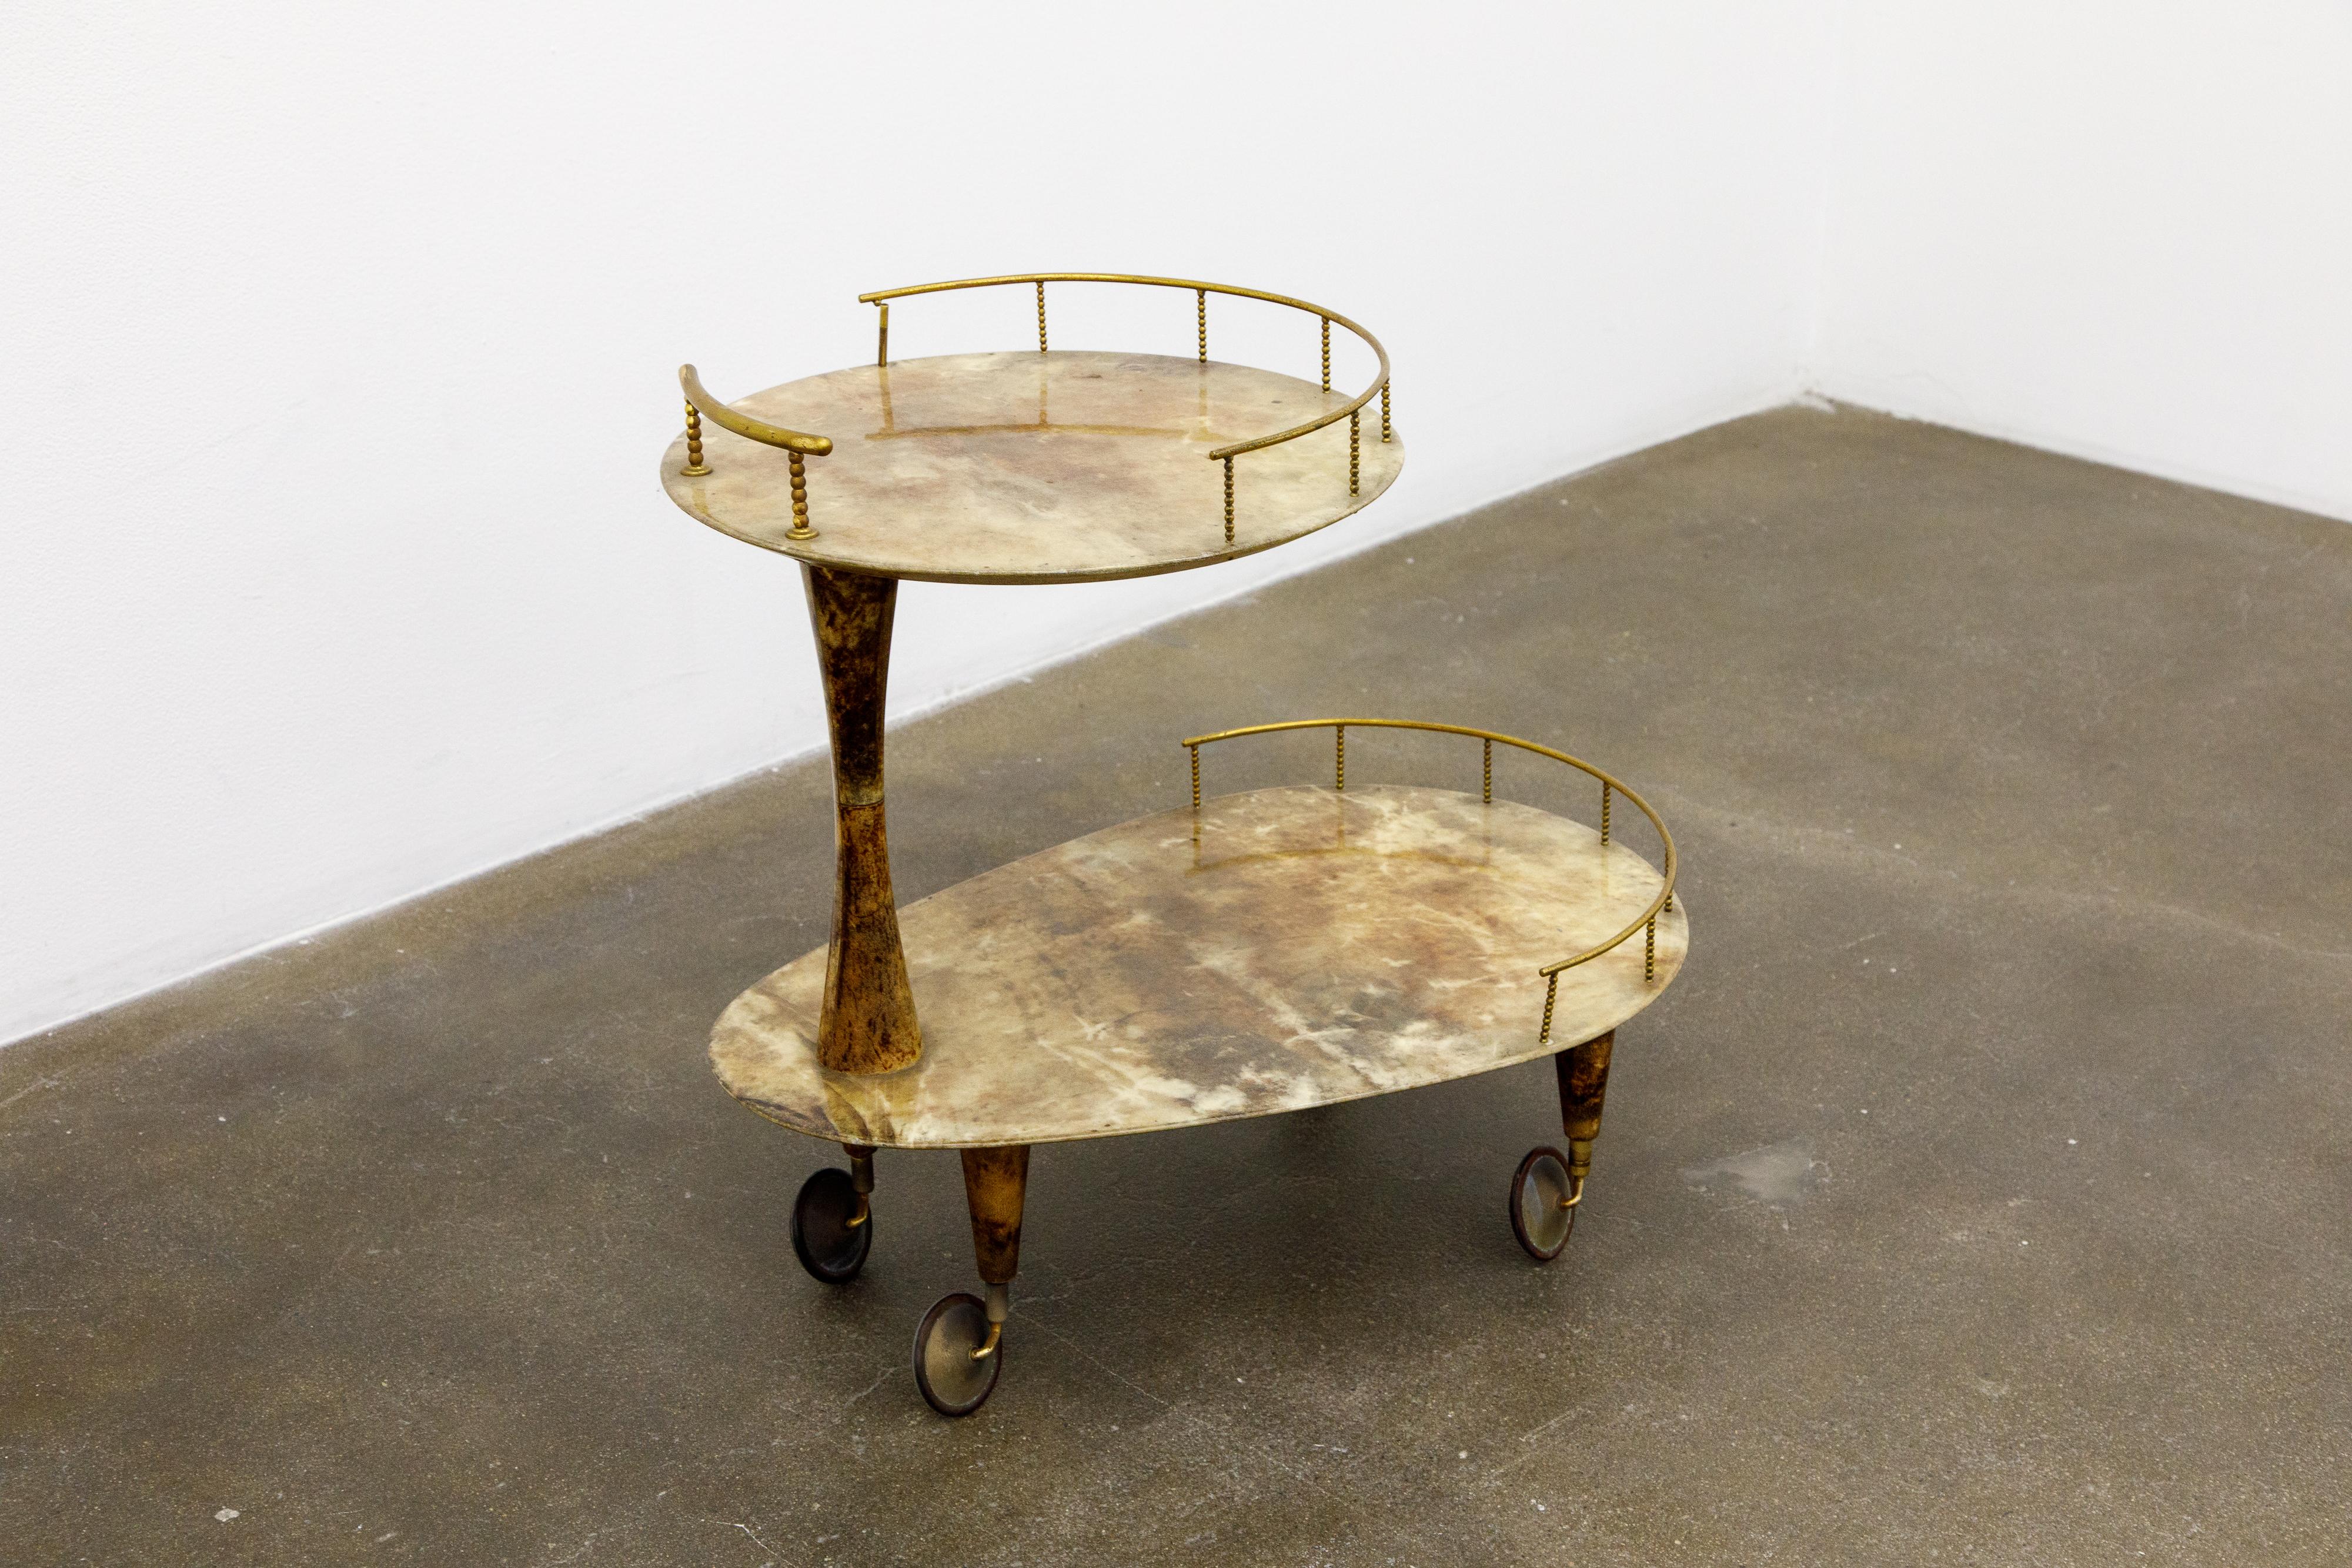 Beautiful 1950s bar cart by Italian artist-craftsman Aldo Tura featuring the designers distinct use of brass and marbleized brown lacquered goatskin that Tura was well-known for. The quality of Aldo Tura's craftsmanship can be attributed to the fact